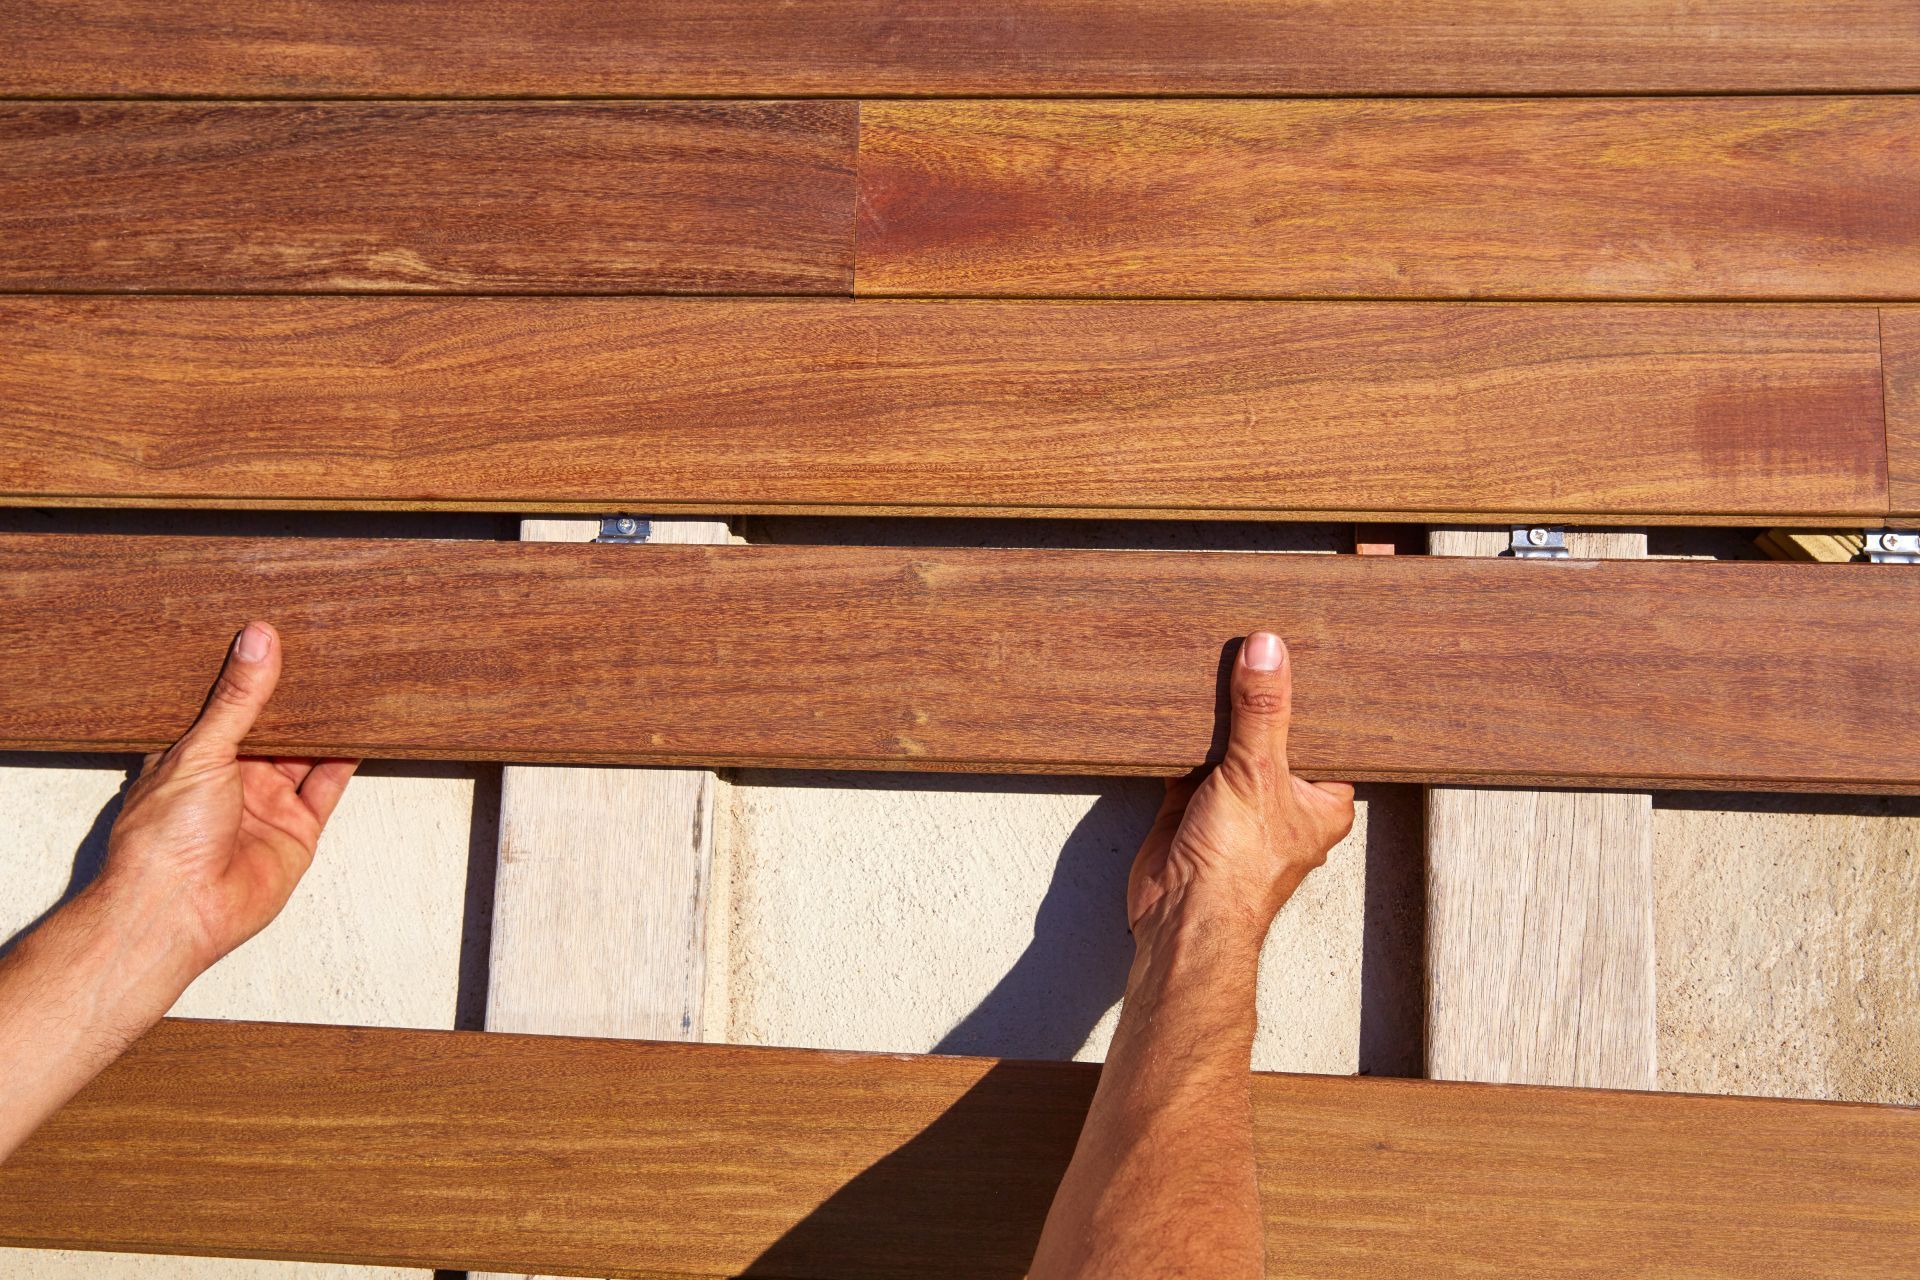 Hands fitting a stained wooden deck board during construction in Stockton, CA.